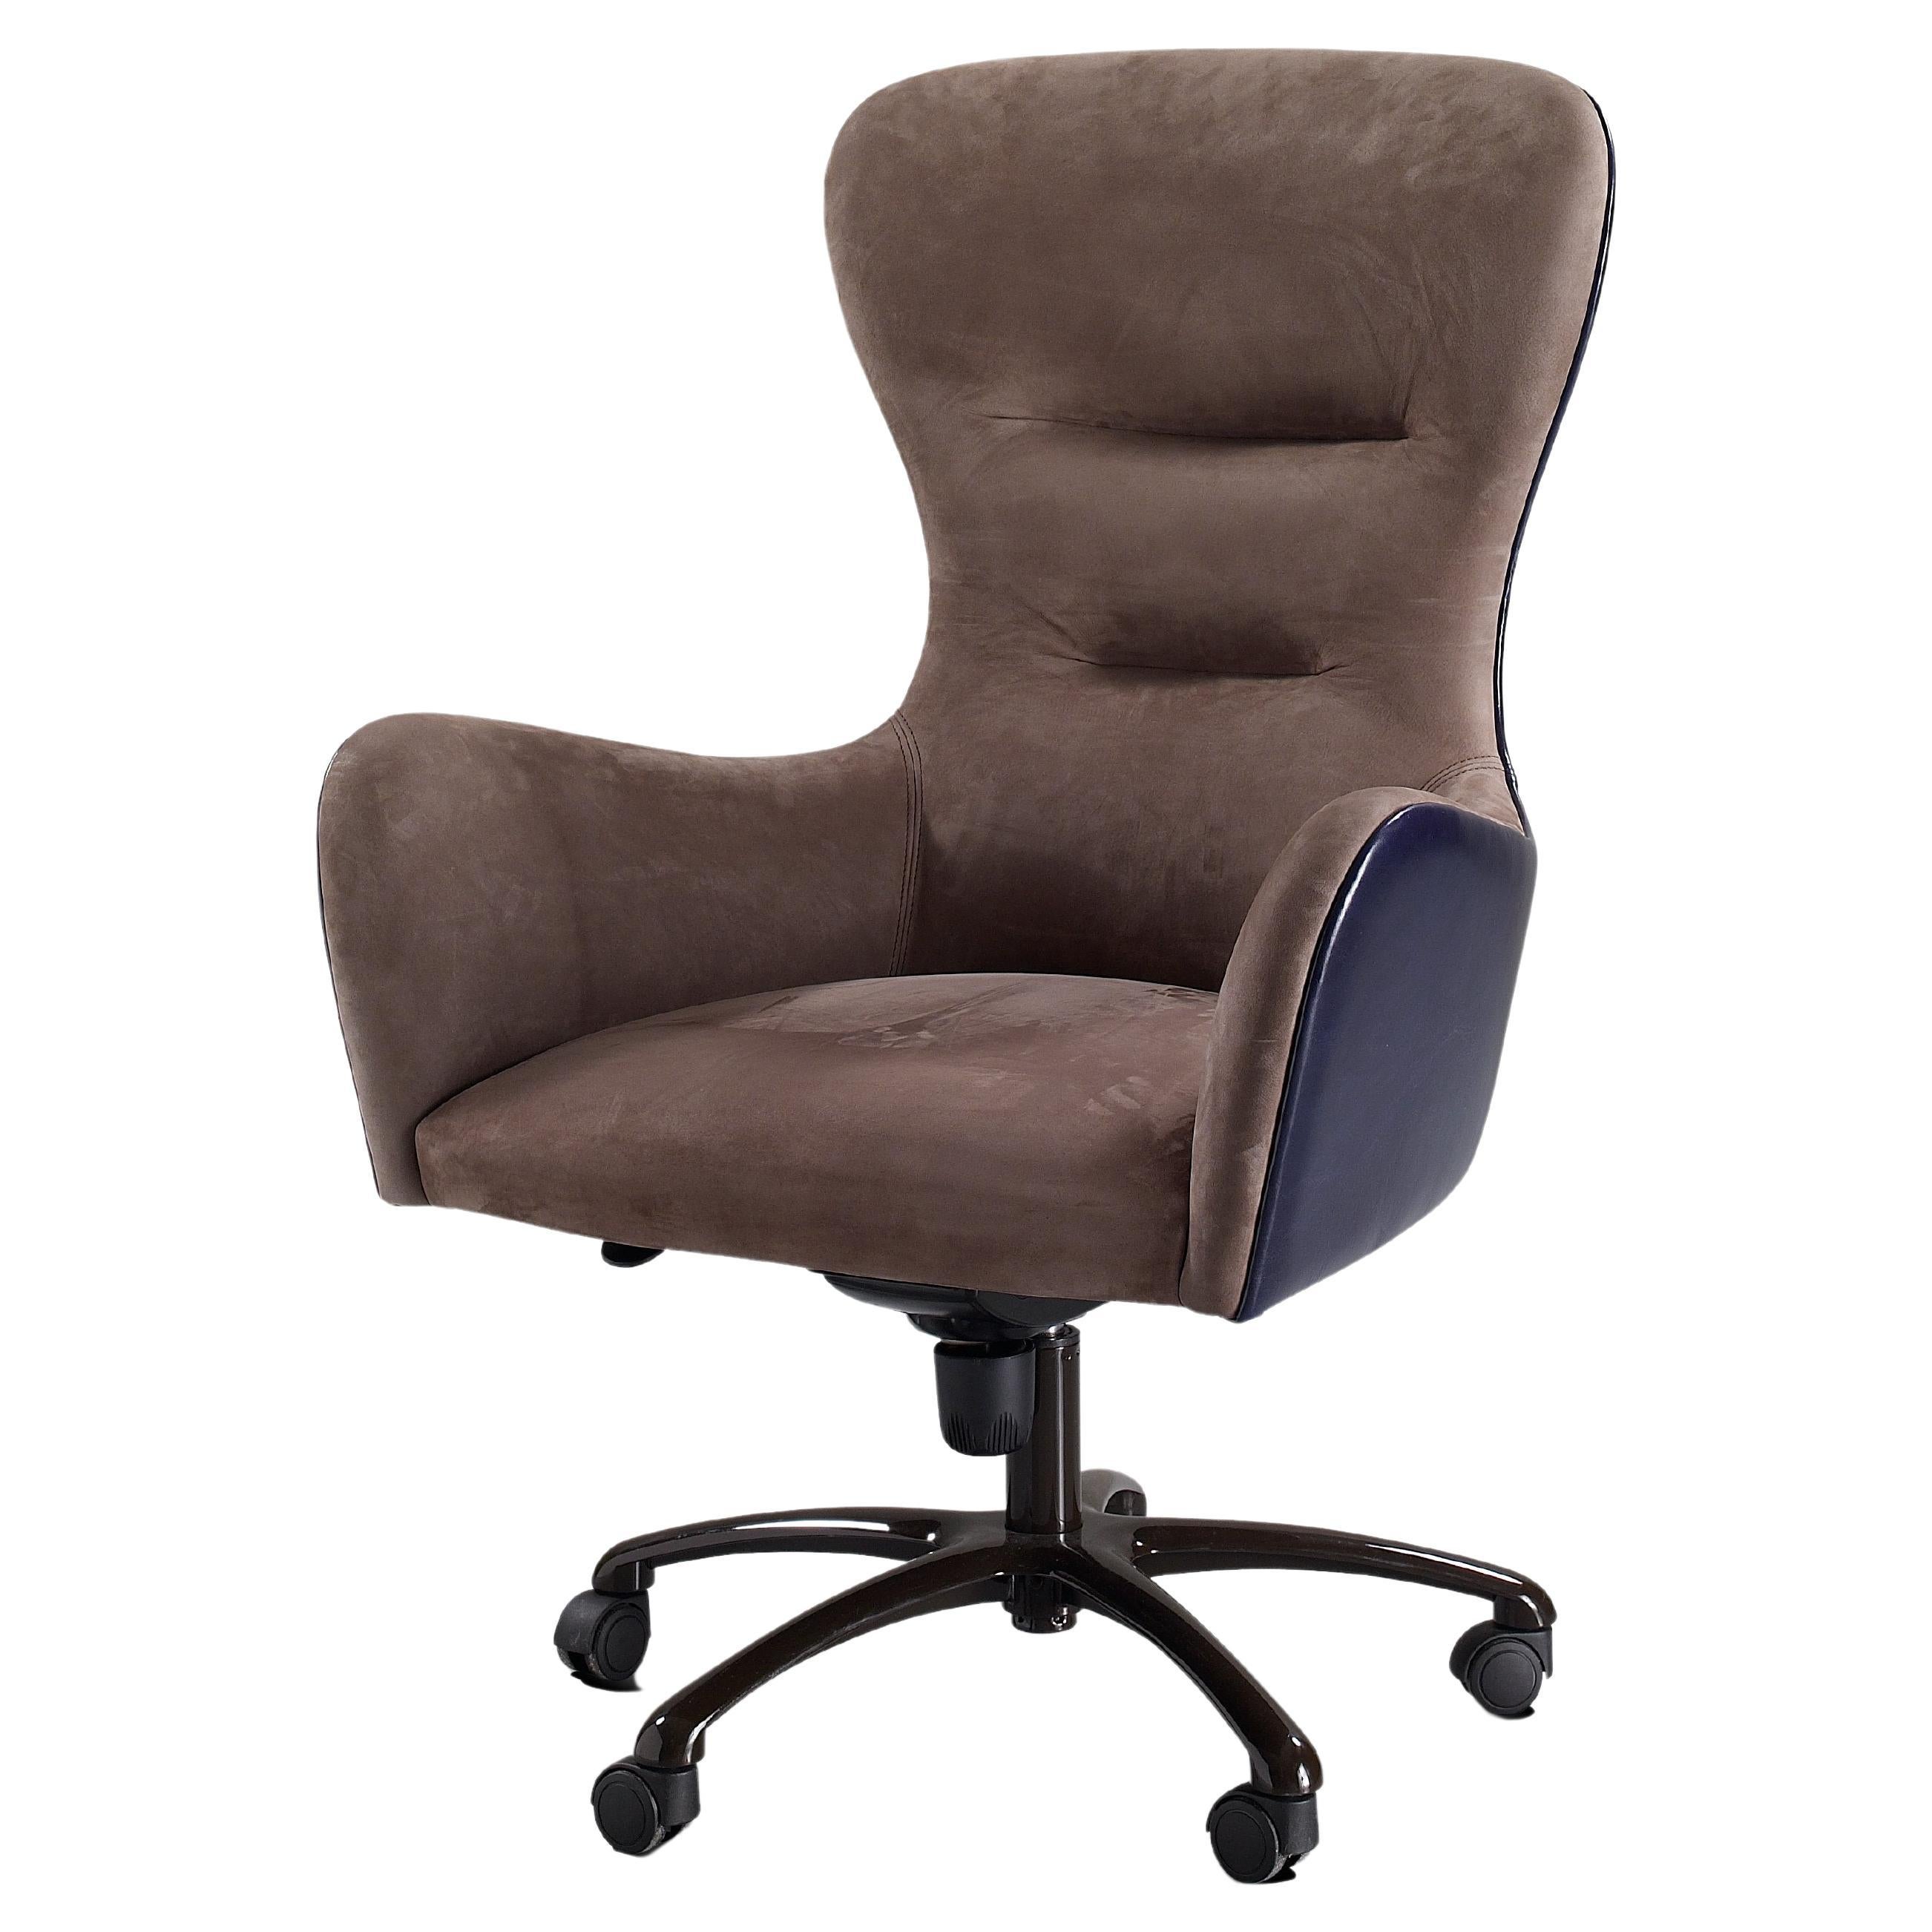 Upholstered, Leather, Gianpier Office Chair Swivel